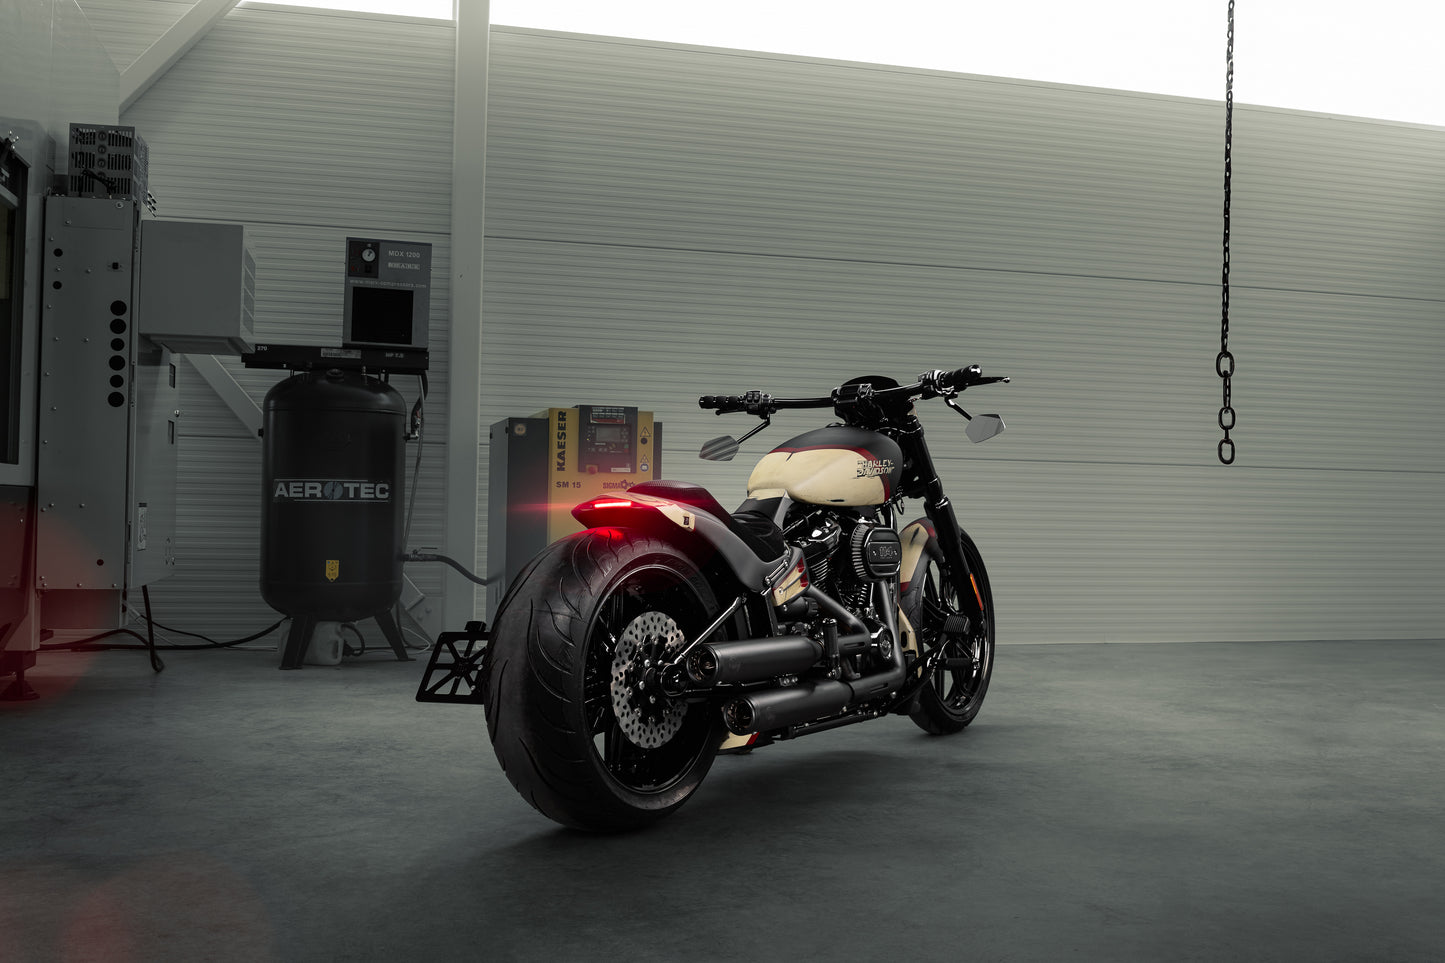 Harley Davidson motorcycle with Killer Custom "Avenger" rear fender kit from the rear in a spacious modern garage